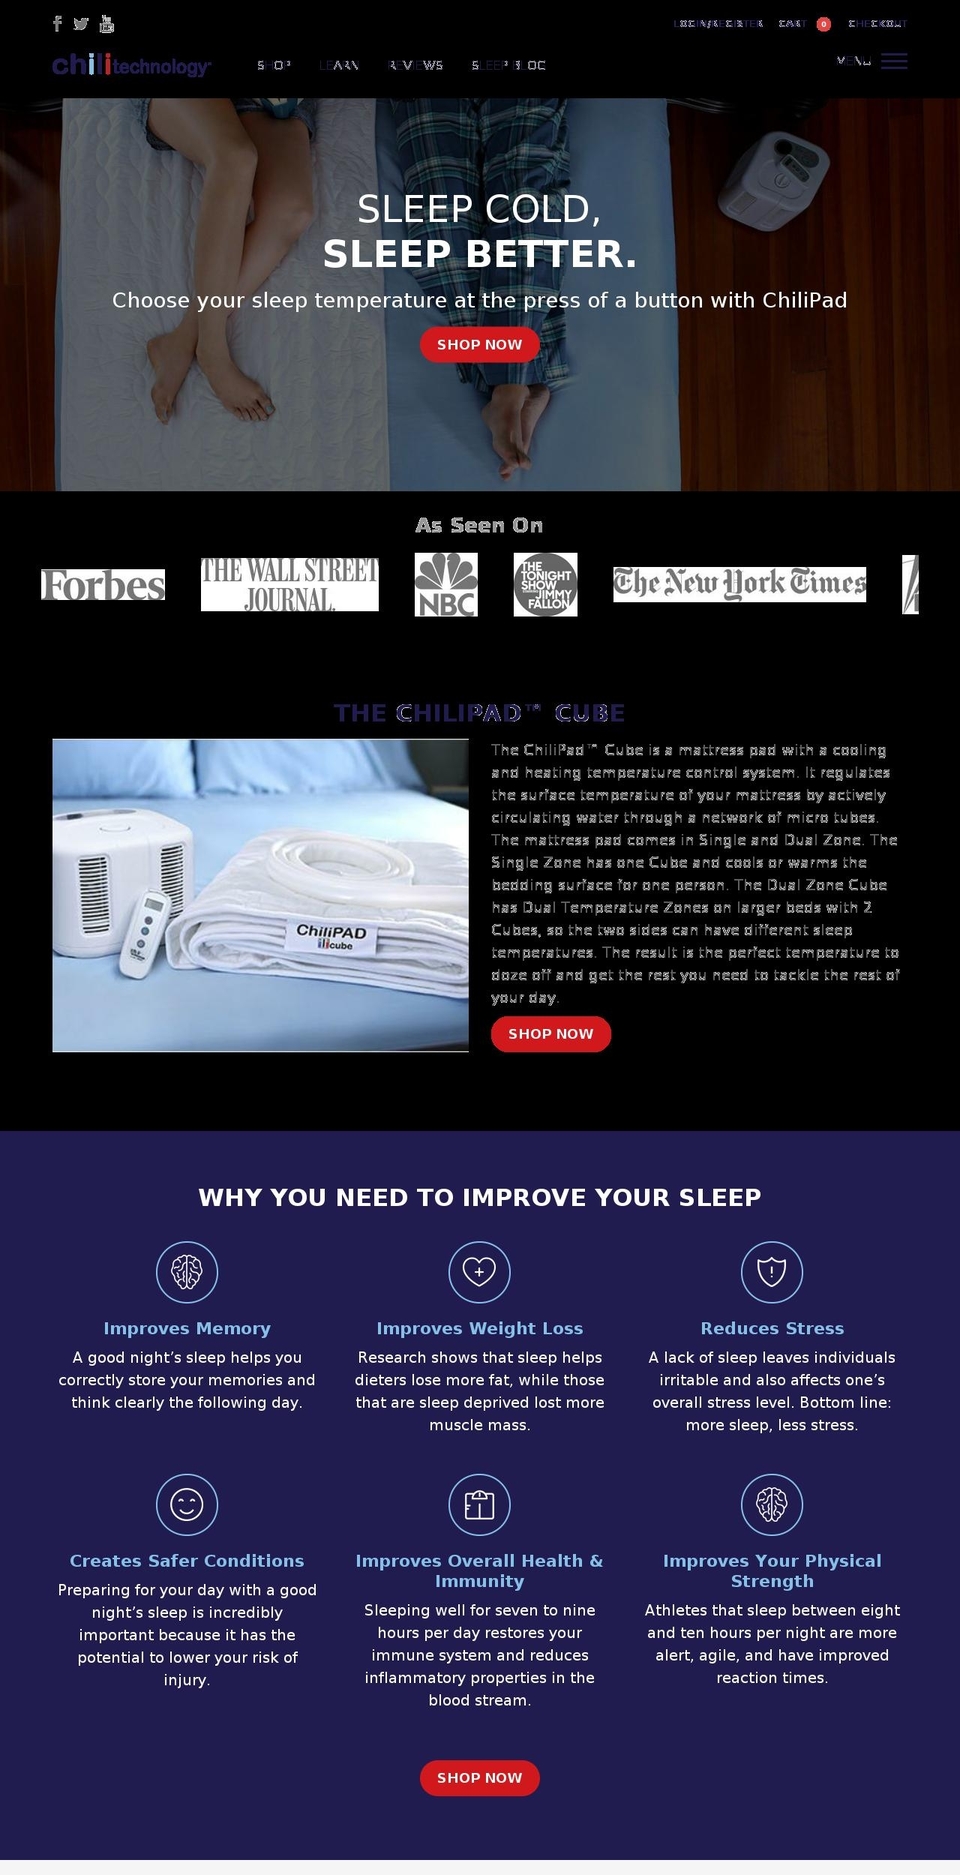 chilitechnology Shopify theme site example sleeptemperature.com